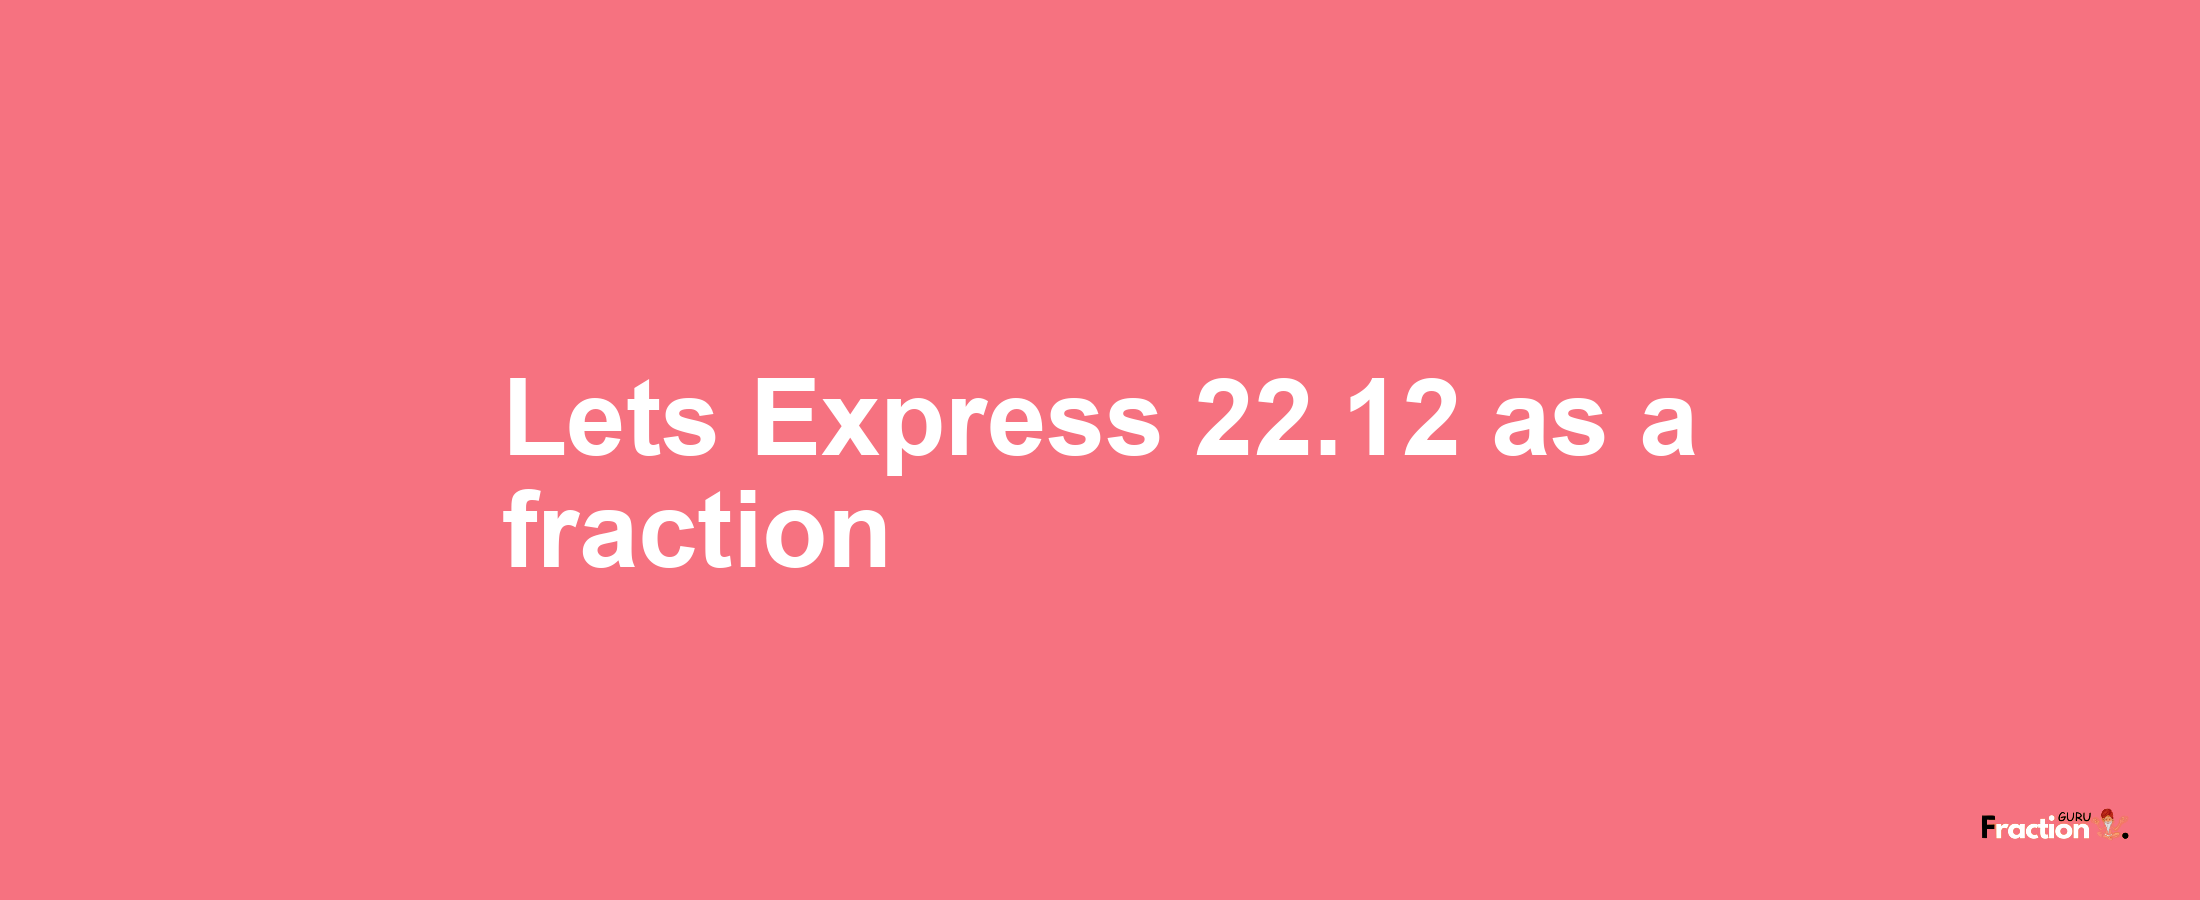 Lets Express 22.12 as afraction